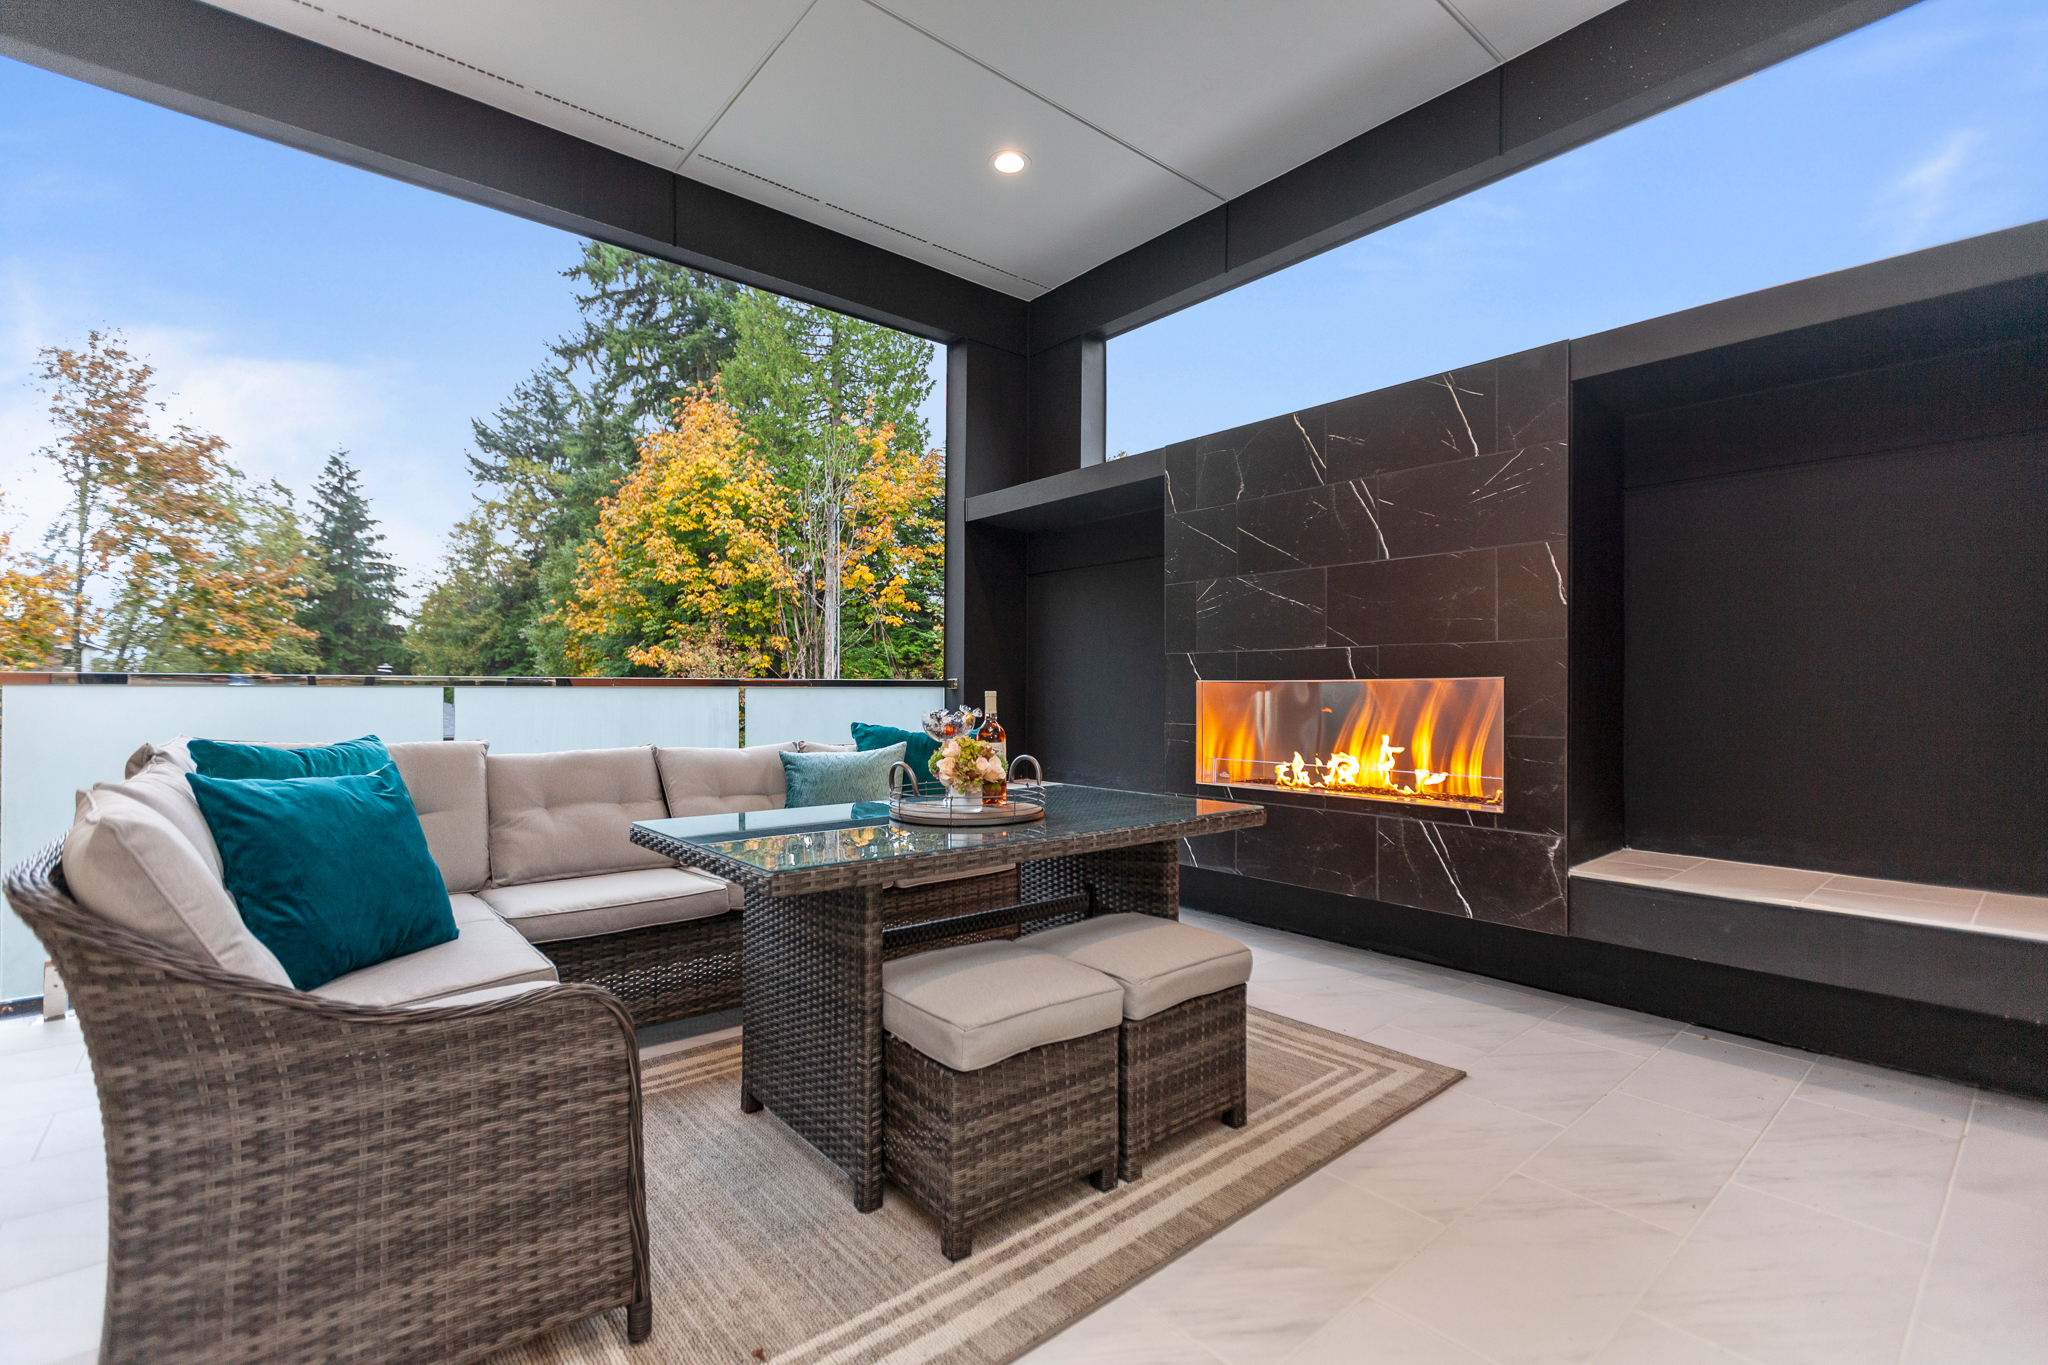 Outdoor Living - Luxury Real Estate - 18109 84th Ave W, Edmonds